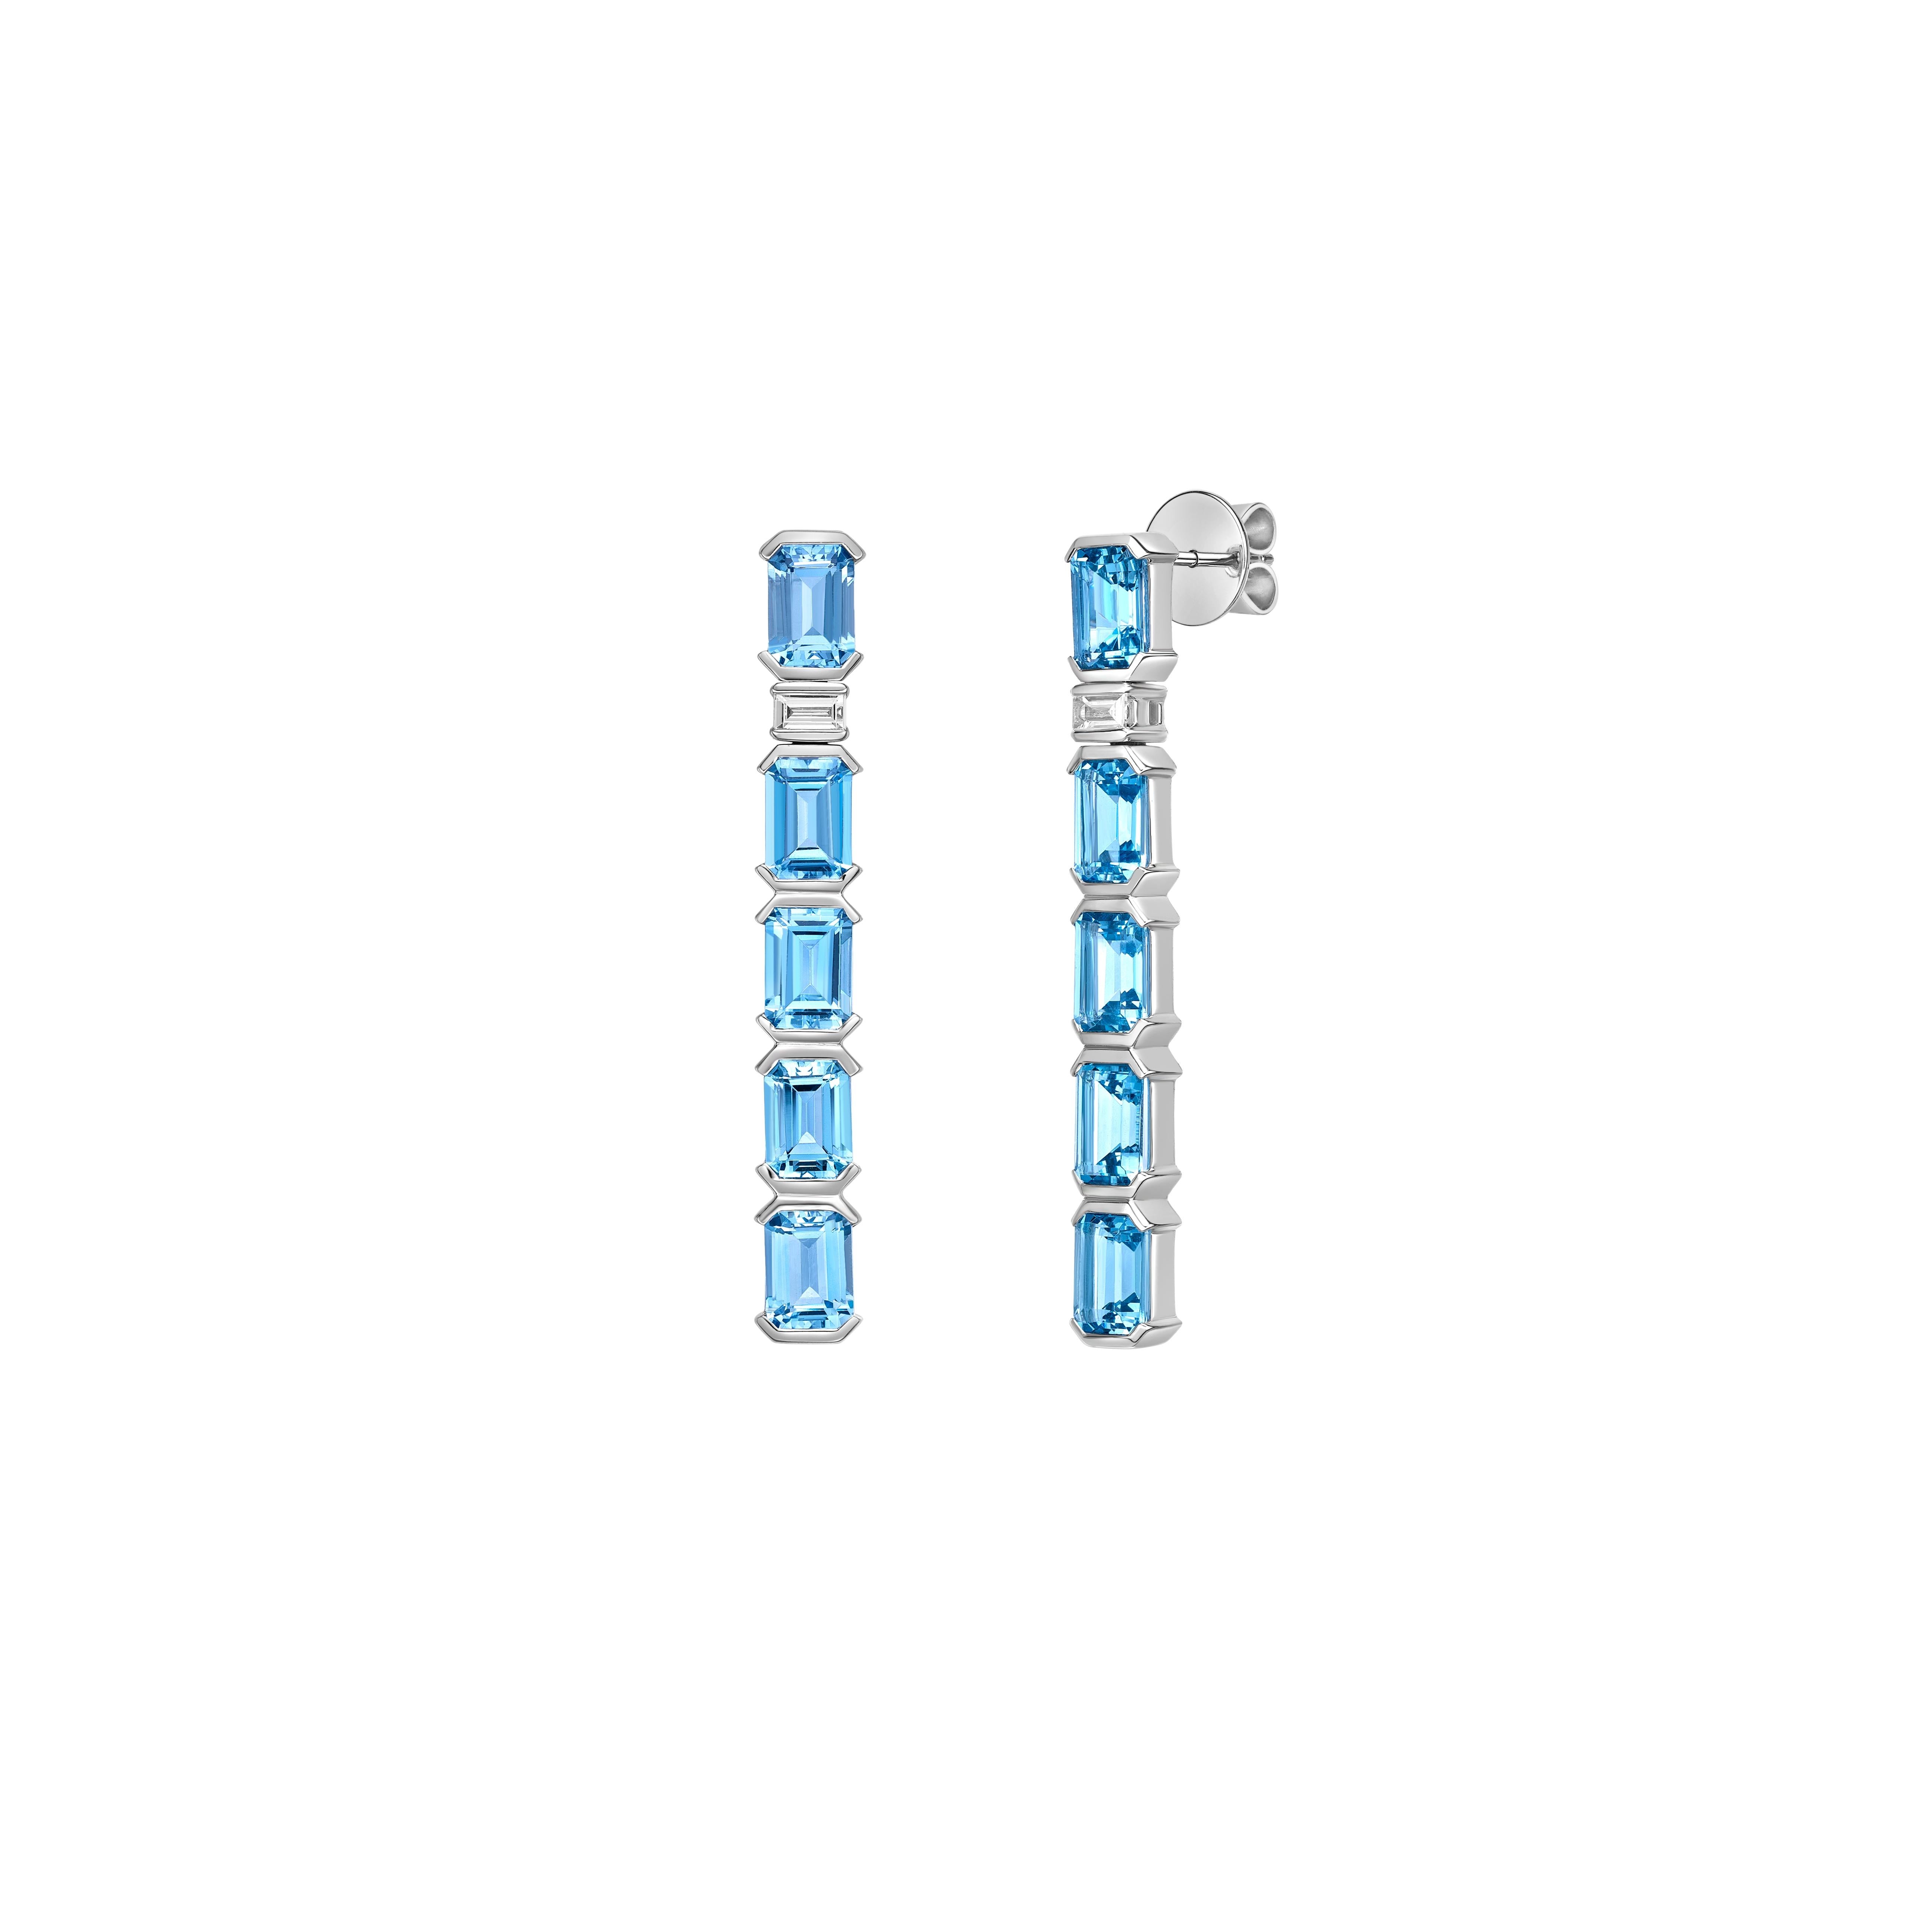 Octagon Cut 8.63 Carat Aquamarine Drop Earrings in 18Karat White Gold with White Diamond. For Sale